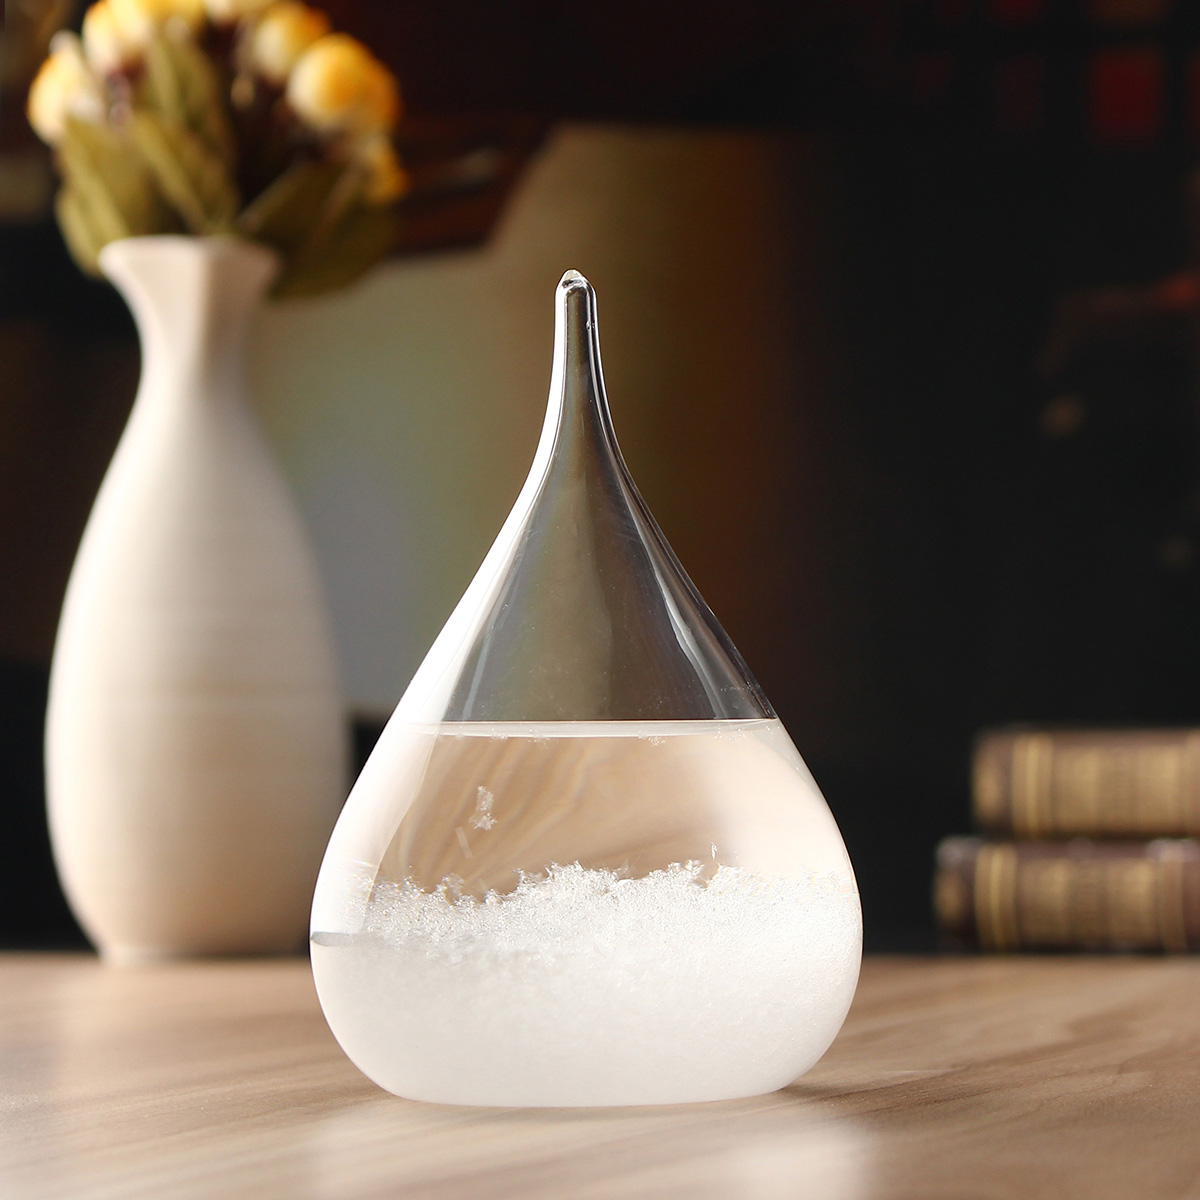 Weather-Forecast-Crystal-Storm-Glass-Home-Decor-Christmas-Gift-1113617-2